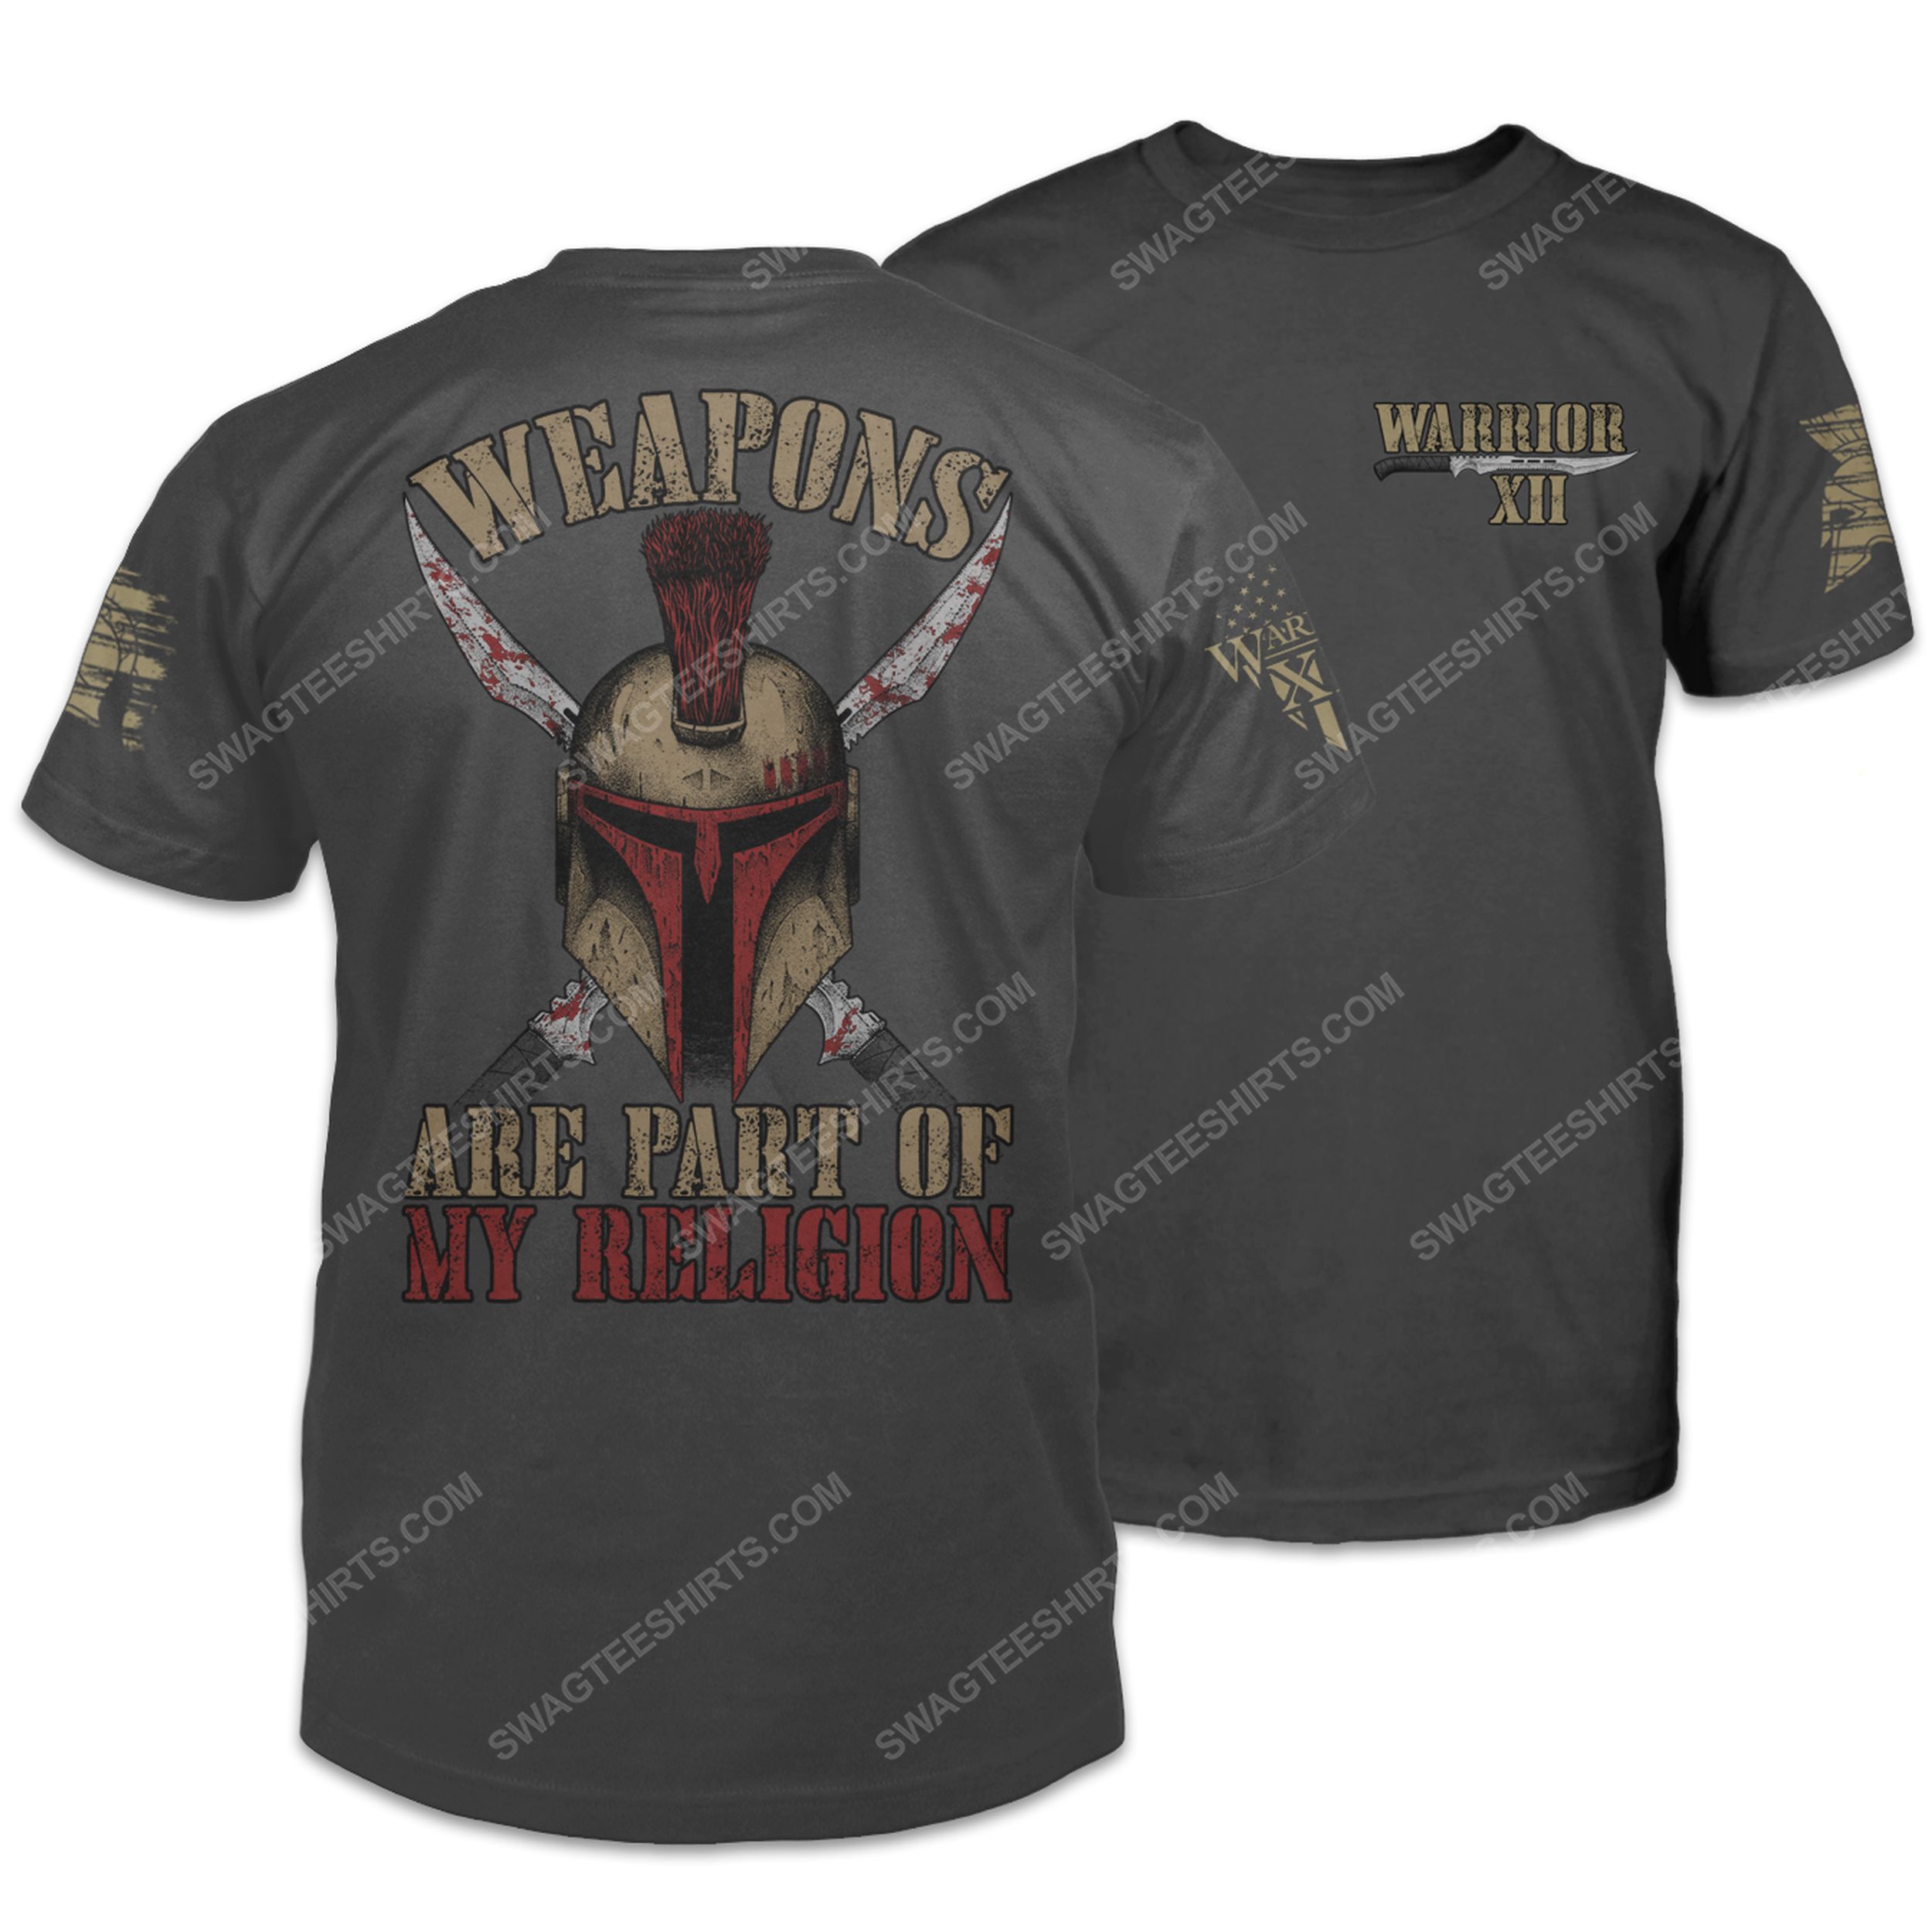 [special edition] Weapons are part of my religion warrior american flag patriotic shirt – maria